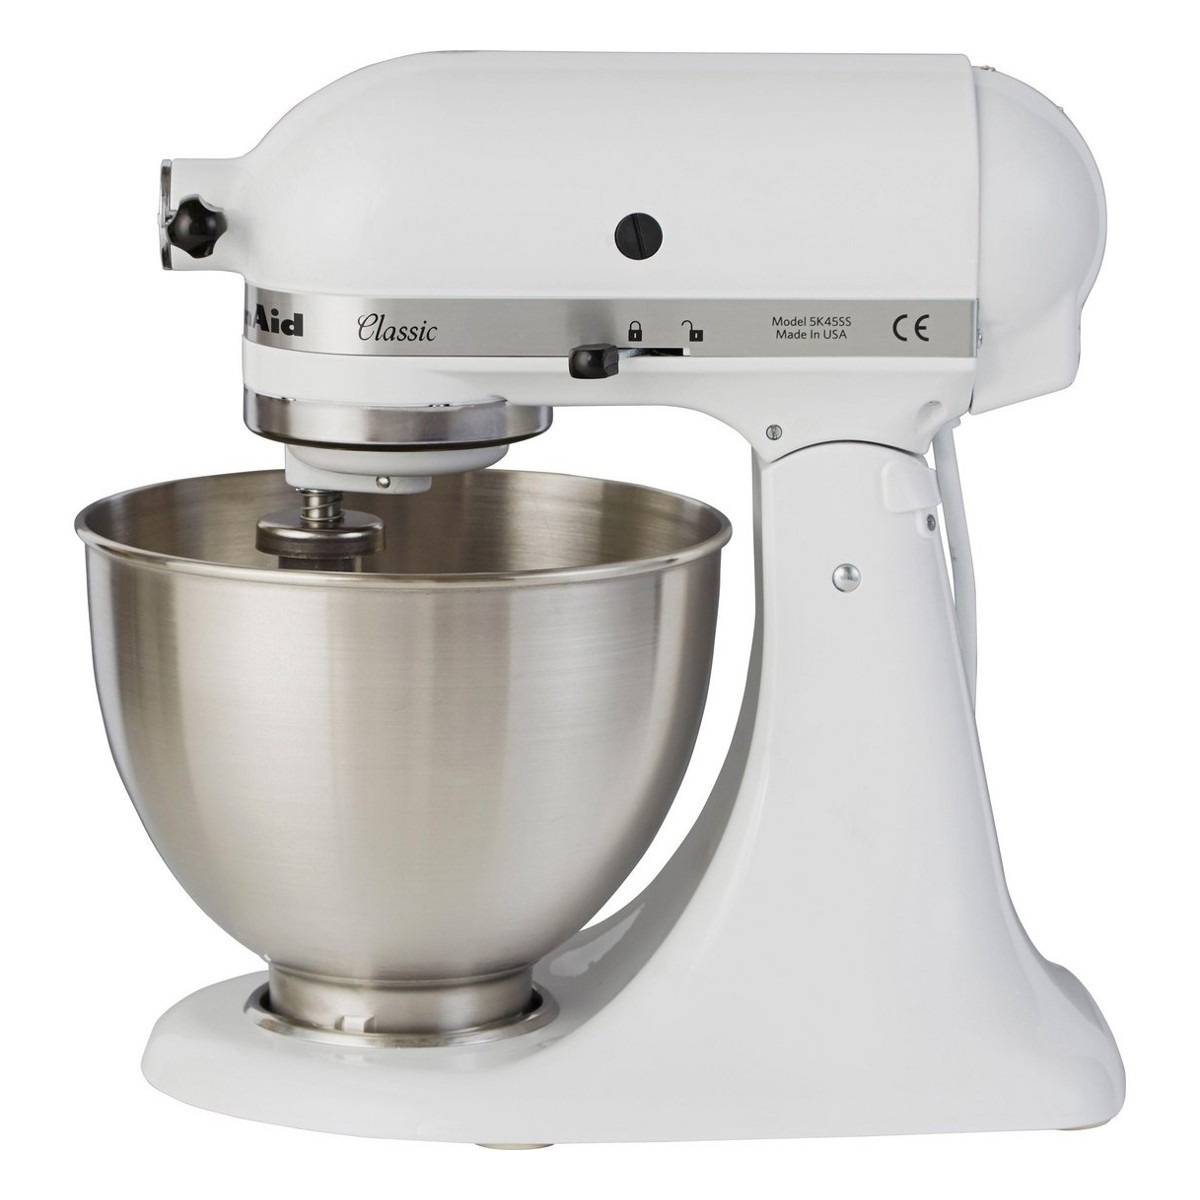 Kitchen Aide Small Appliances
 Kitchenaid 5K45SSBWH Classic Stand Mixer with 4 3L